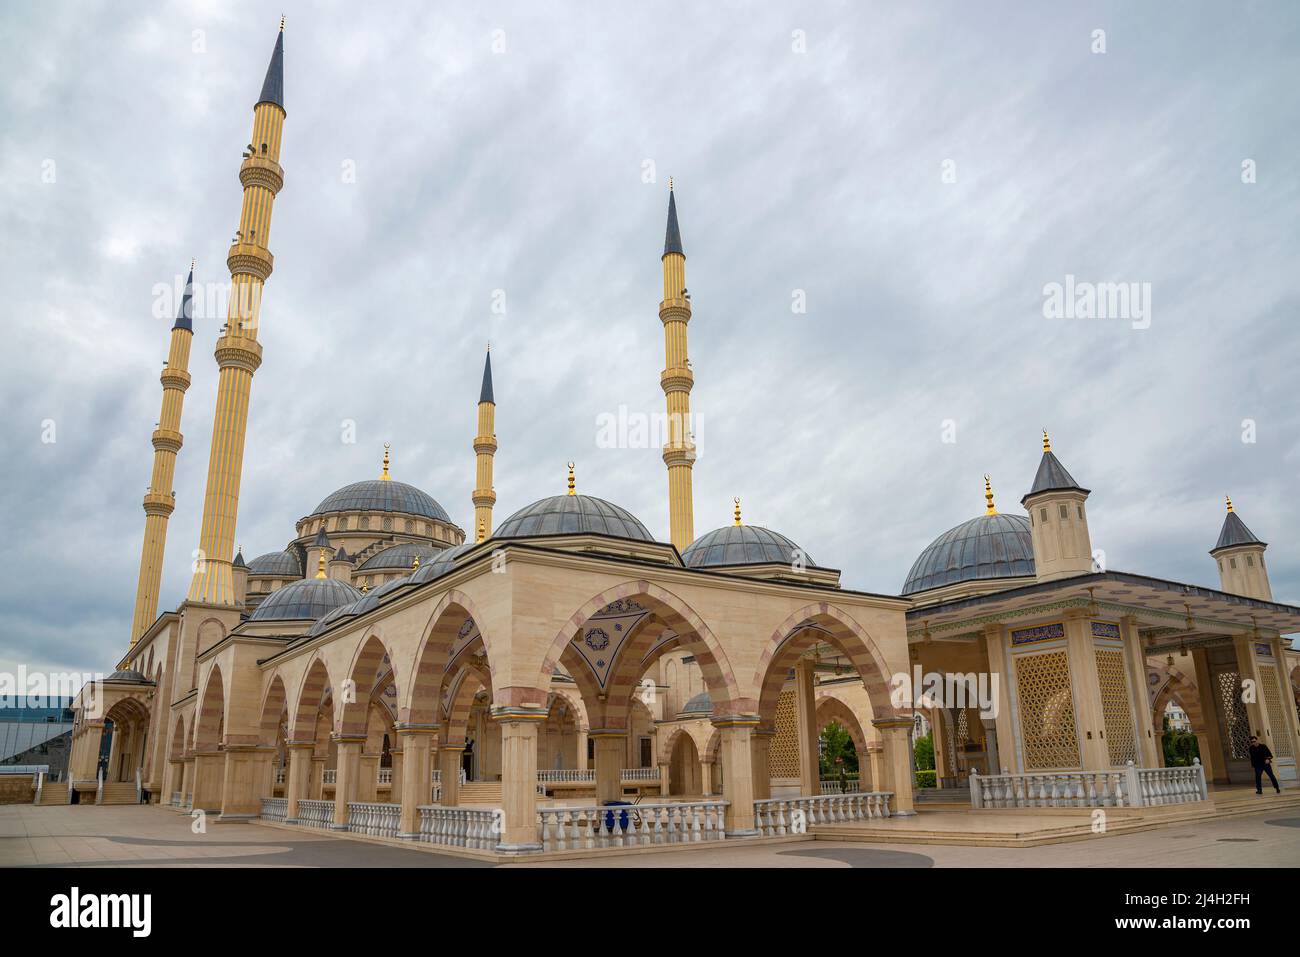 GROZNY, RUSSIA - SEPTEMBER 29, 2021: At the Heart of Chechnya Mosque on a cloudy day. Grozny, Chechen republic, Russia Stock Photo